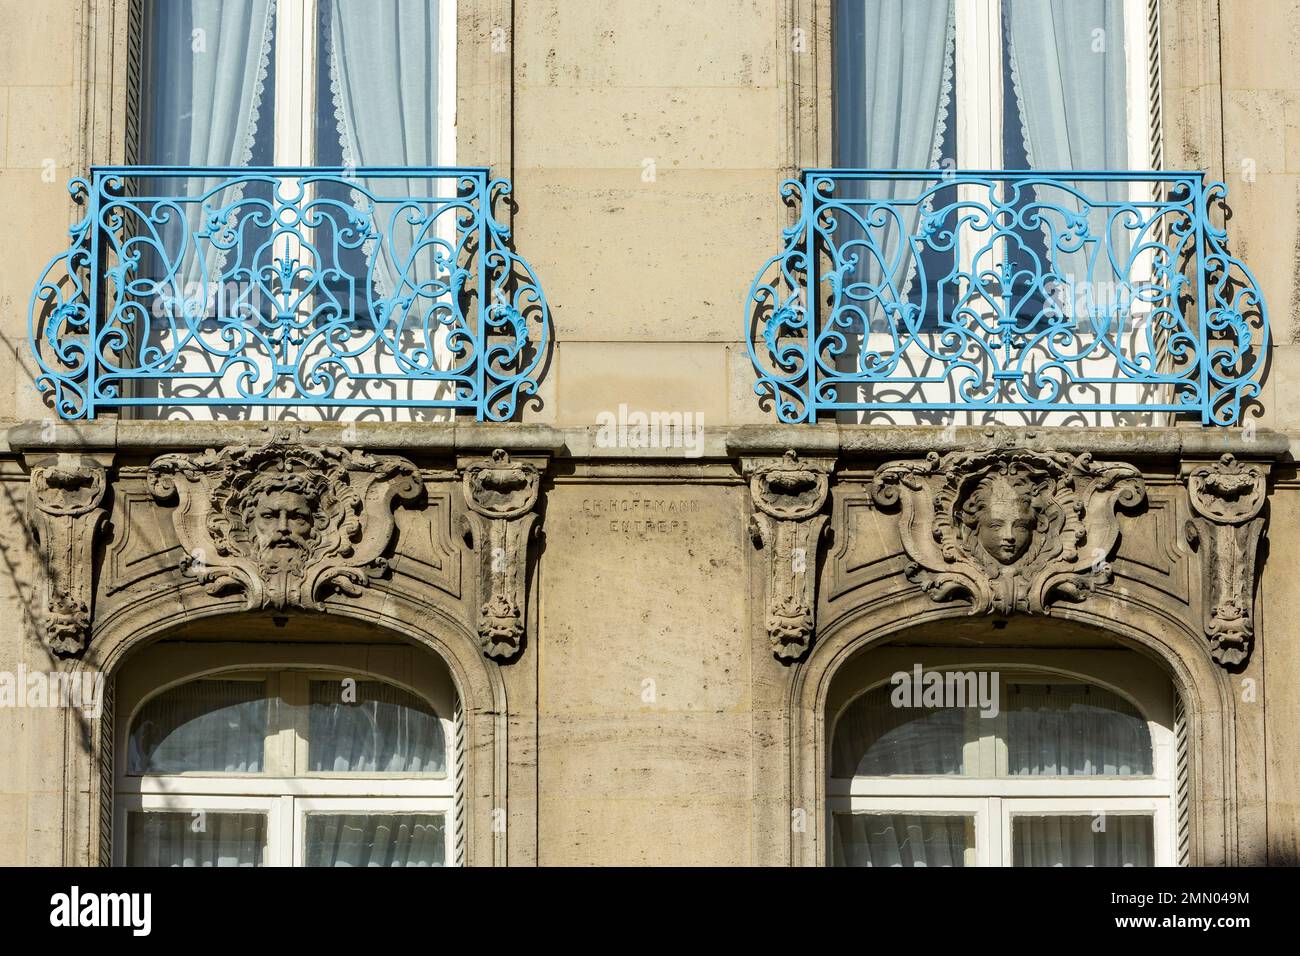 France, Meurthe et Moselle, Nancy, facade of an apartment building with mascaron ornament and window railings made of wrought iron located at the corner of Rue stanislas and Rue des Michottes Stock Photo